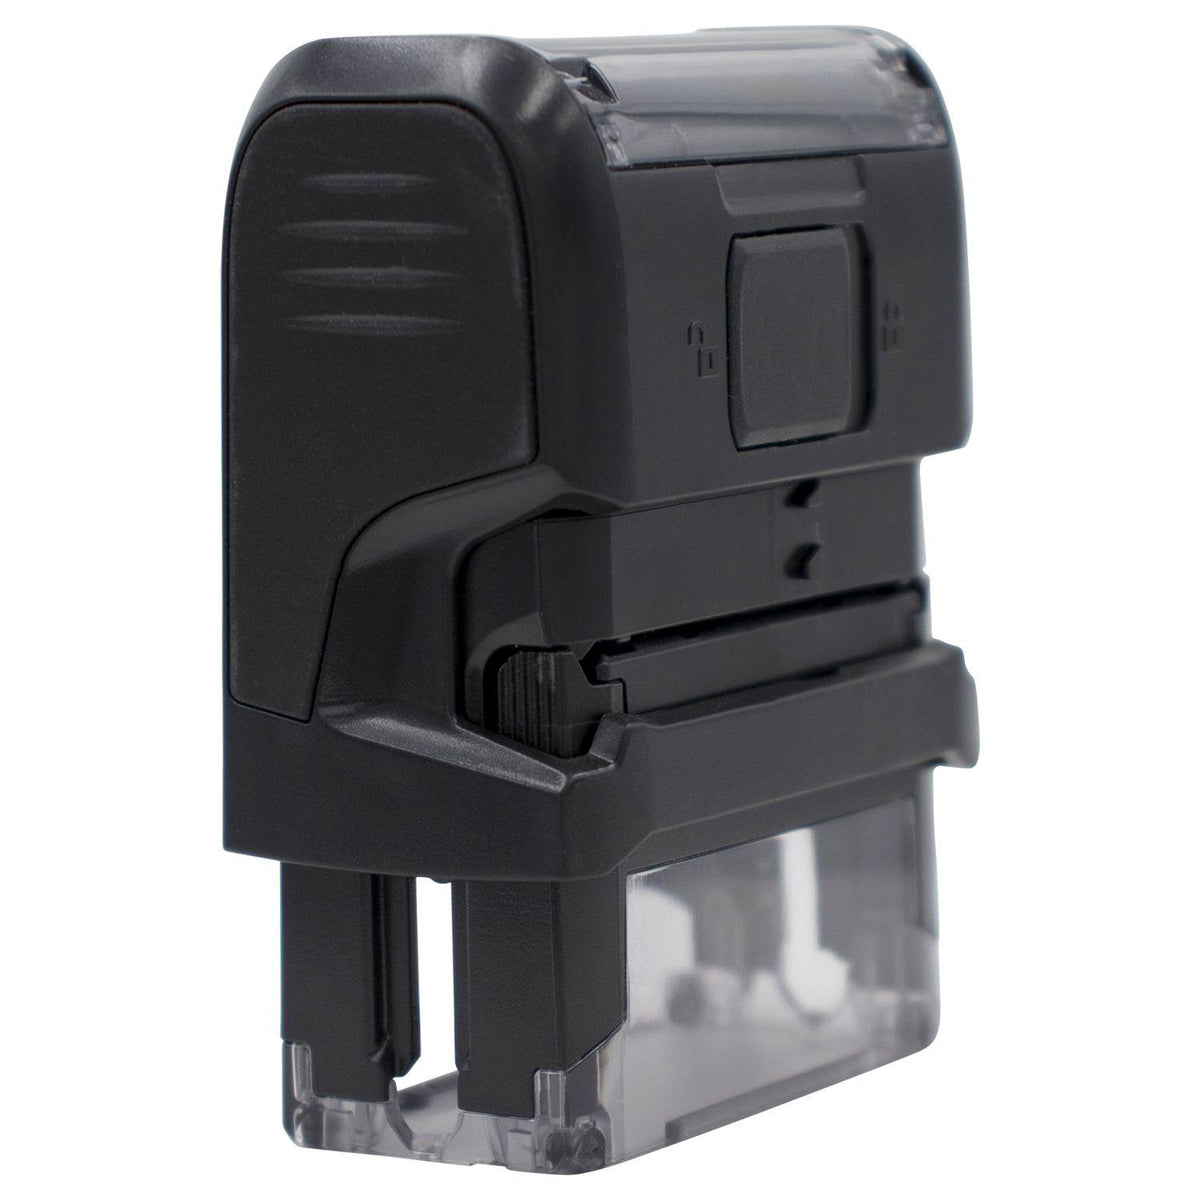 Large Self-Inking Narrow For Deposit Only Stamp - Engineer Seal Stamps - Brand_Trodat, Impression Size_Large, Stamp Type_Self-Inking Stamp, Type of Use_Business, Type of Use_Finance, Type of Use_Office